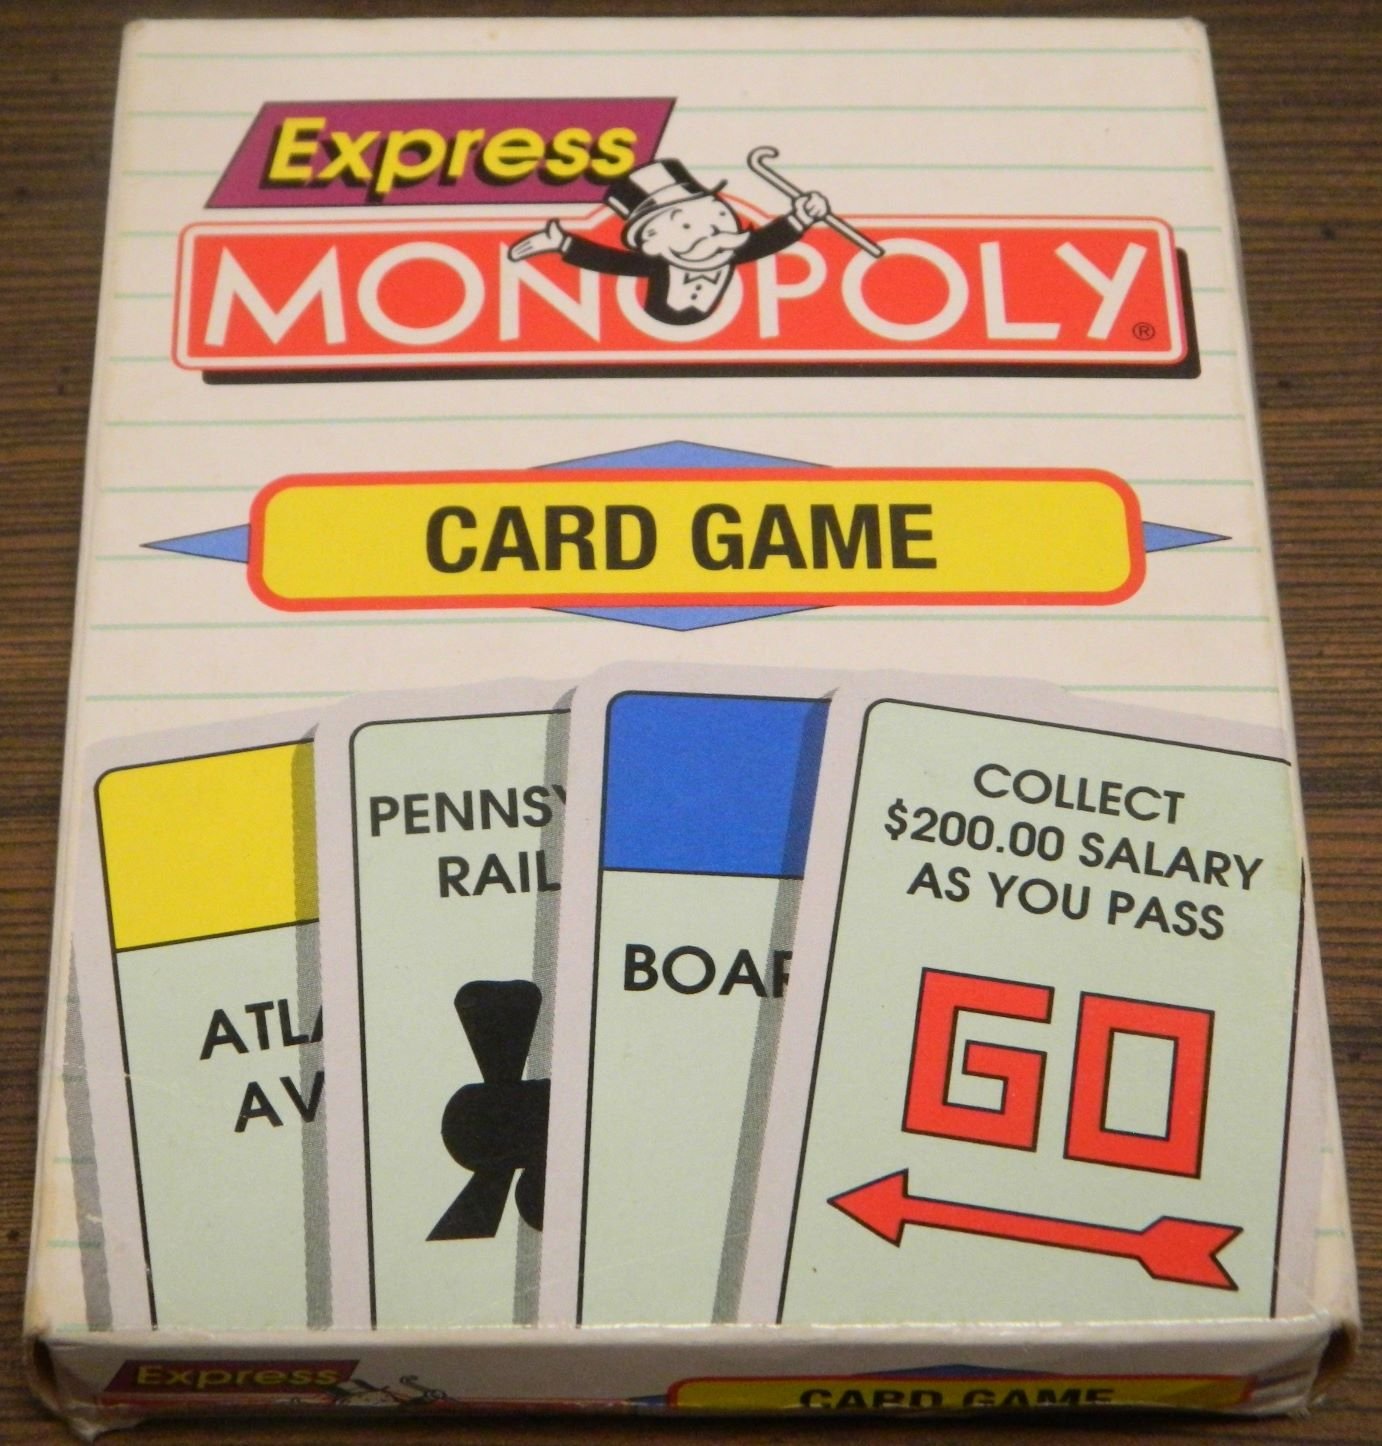 Express Monopoly Card Game Review and Rules